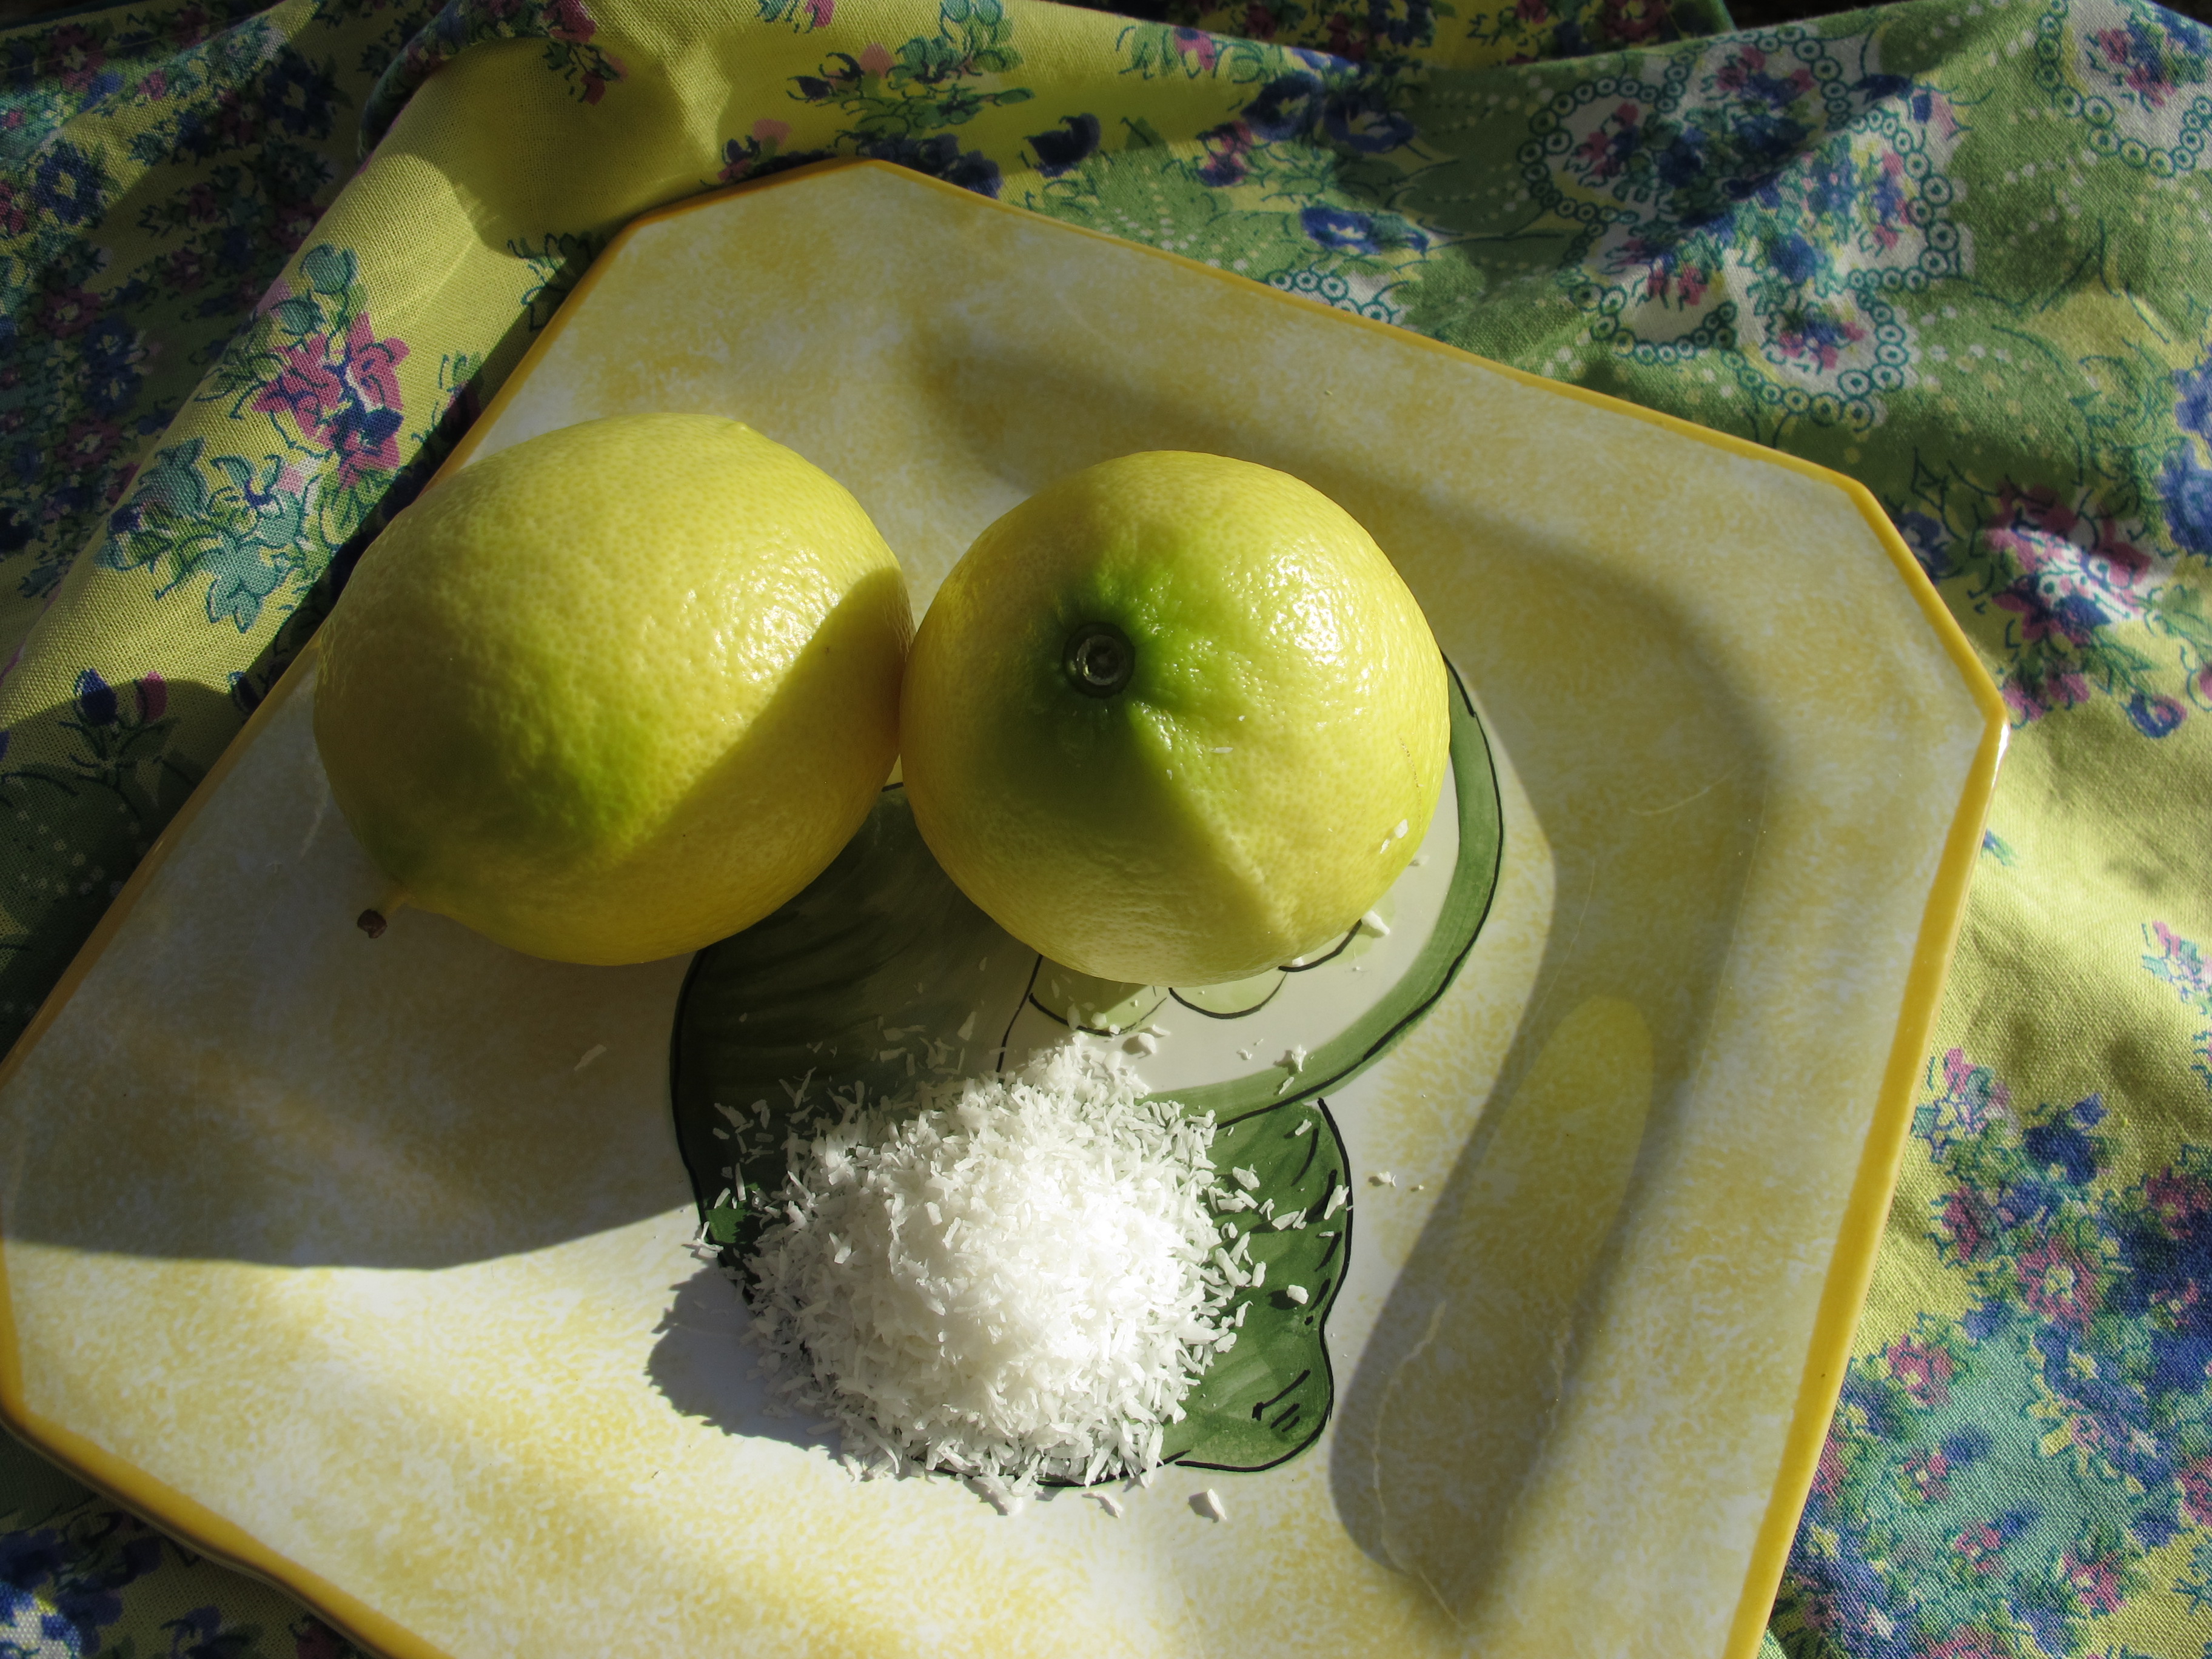 yellow and green limes on a yellow plate with shredded coconut.